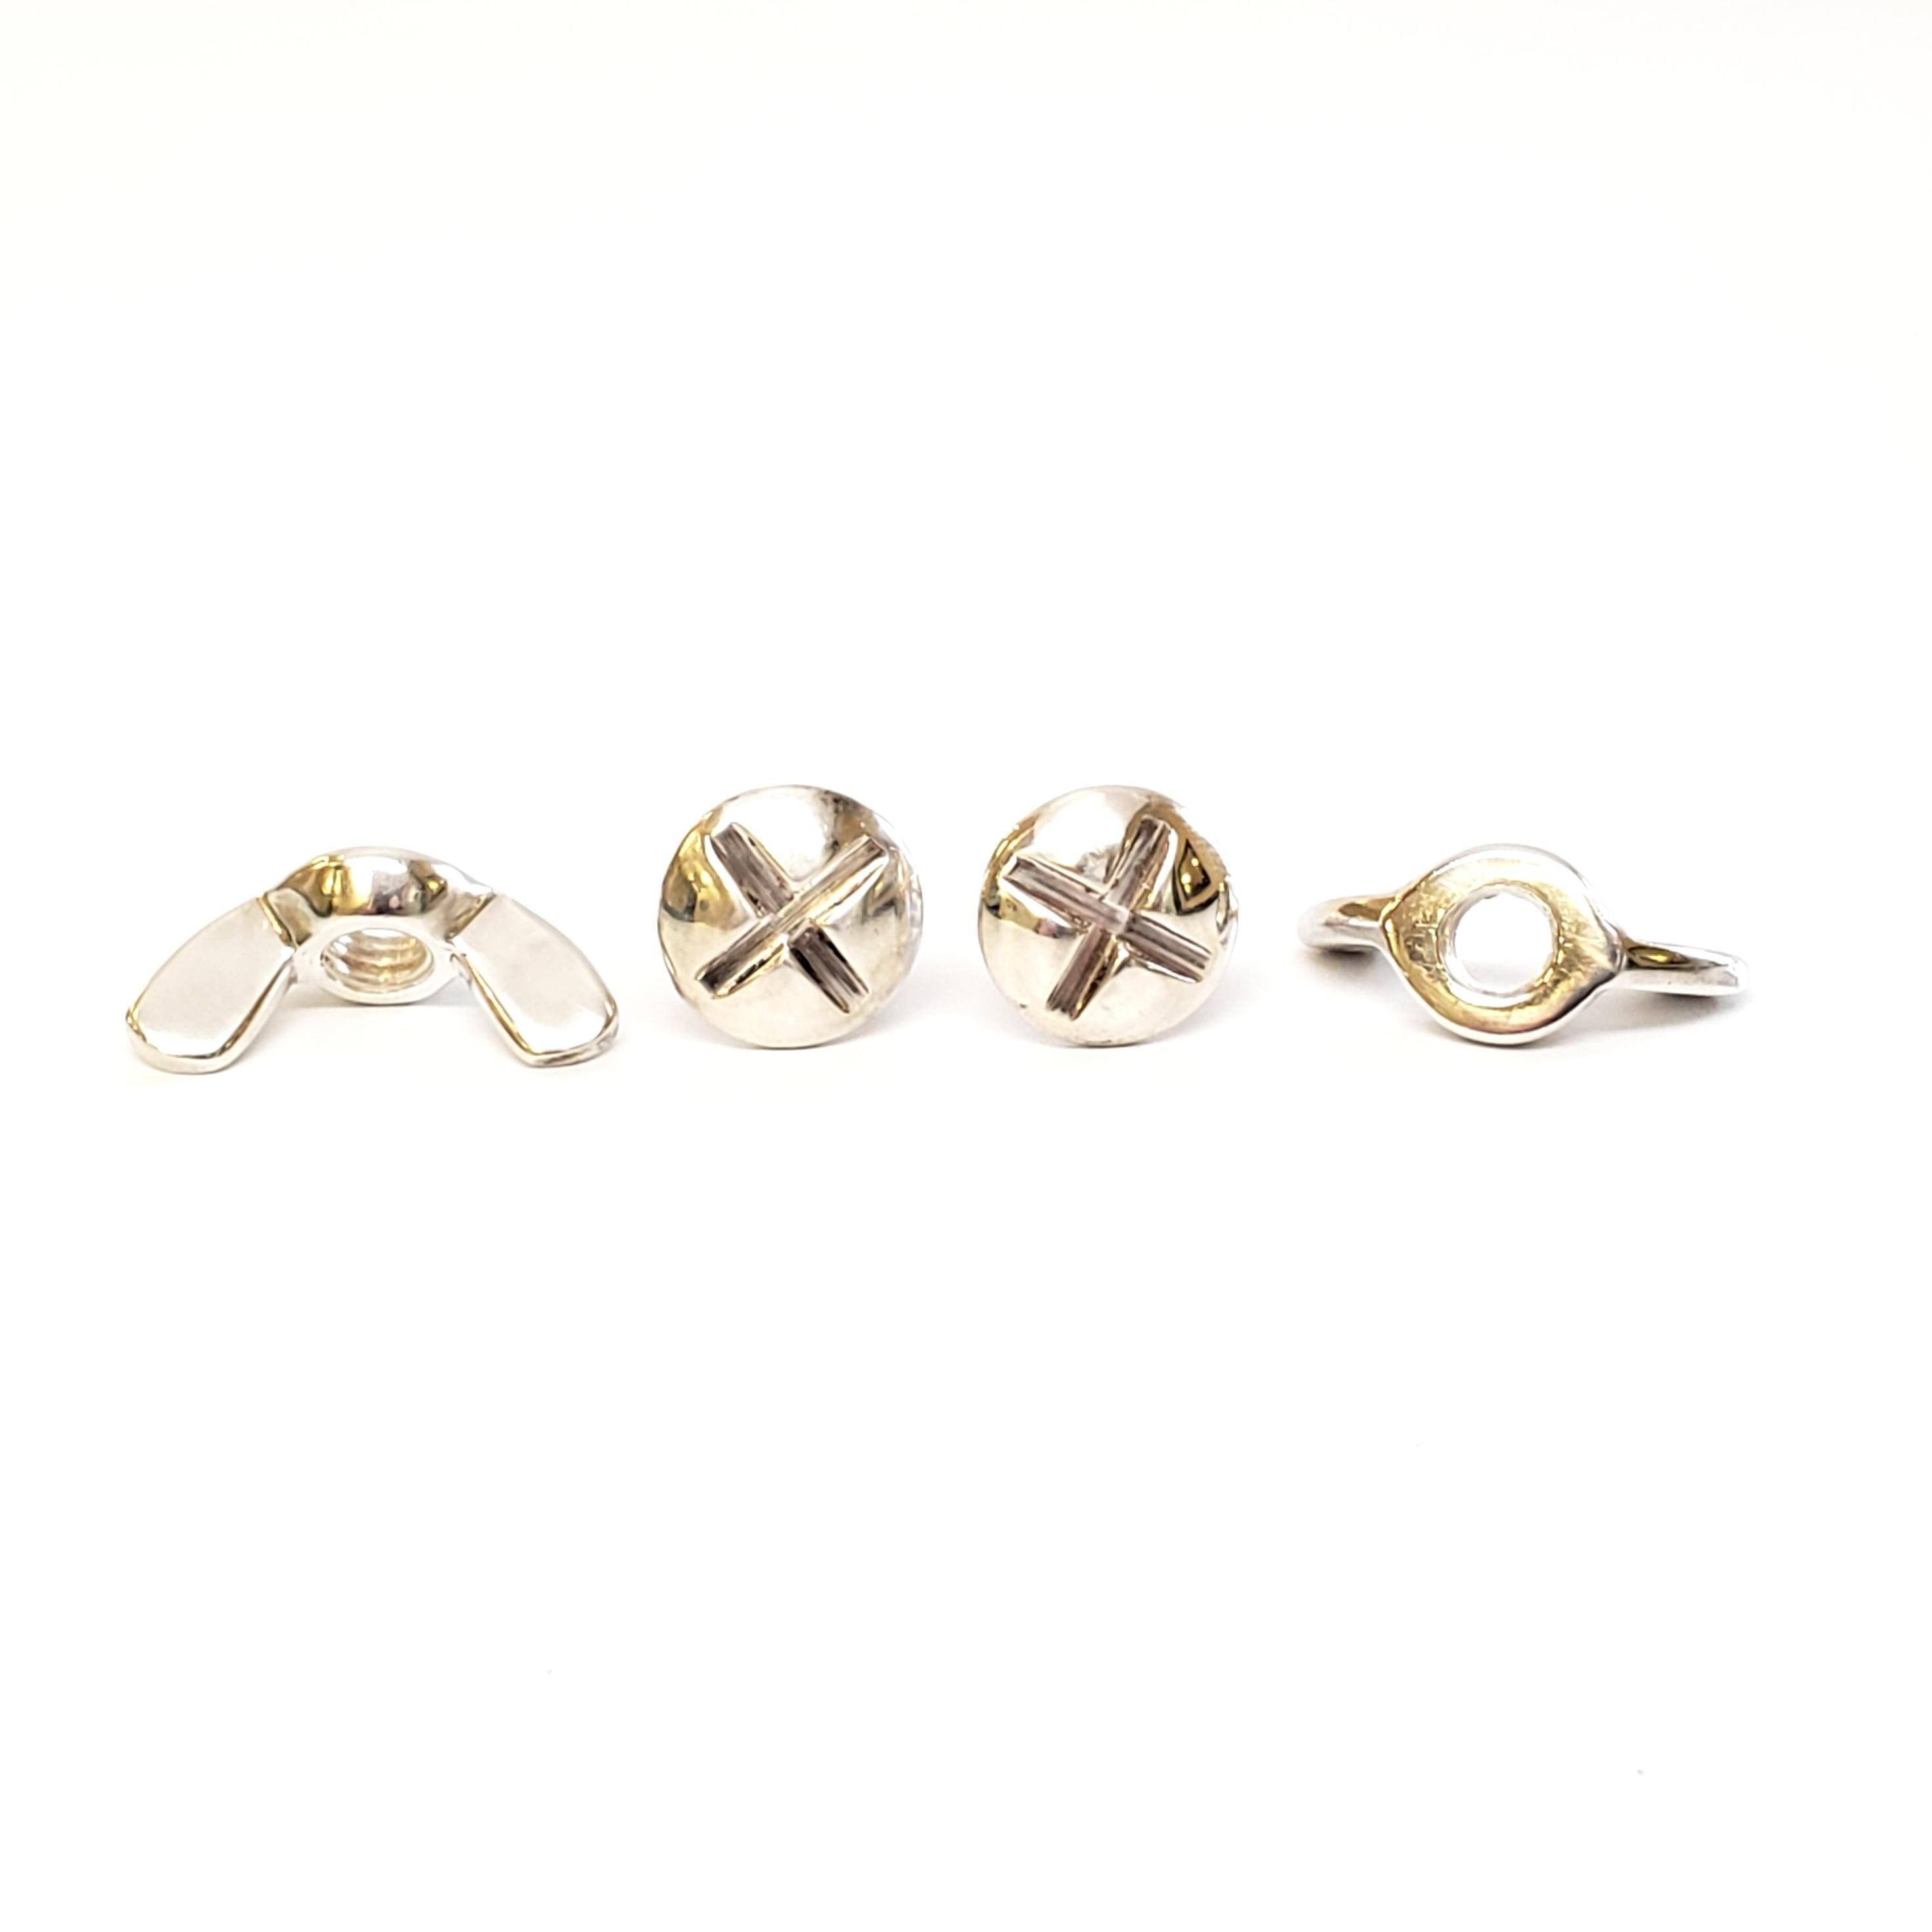 English Sterling Silver Wing Nut and Bolt Cufflinks 2